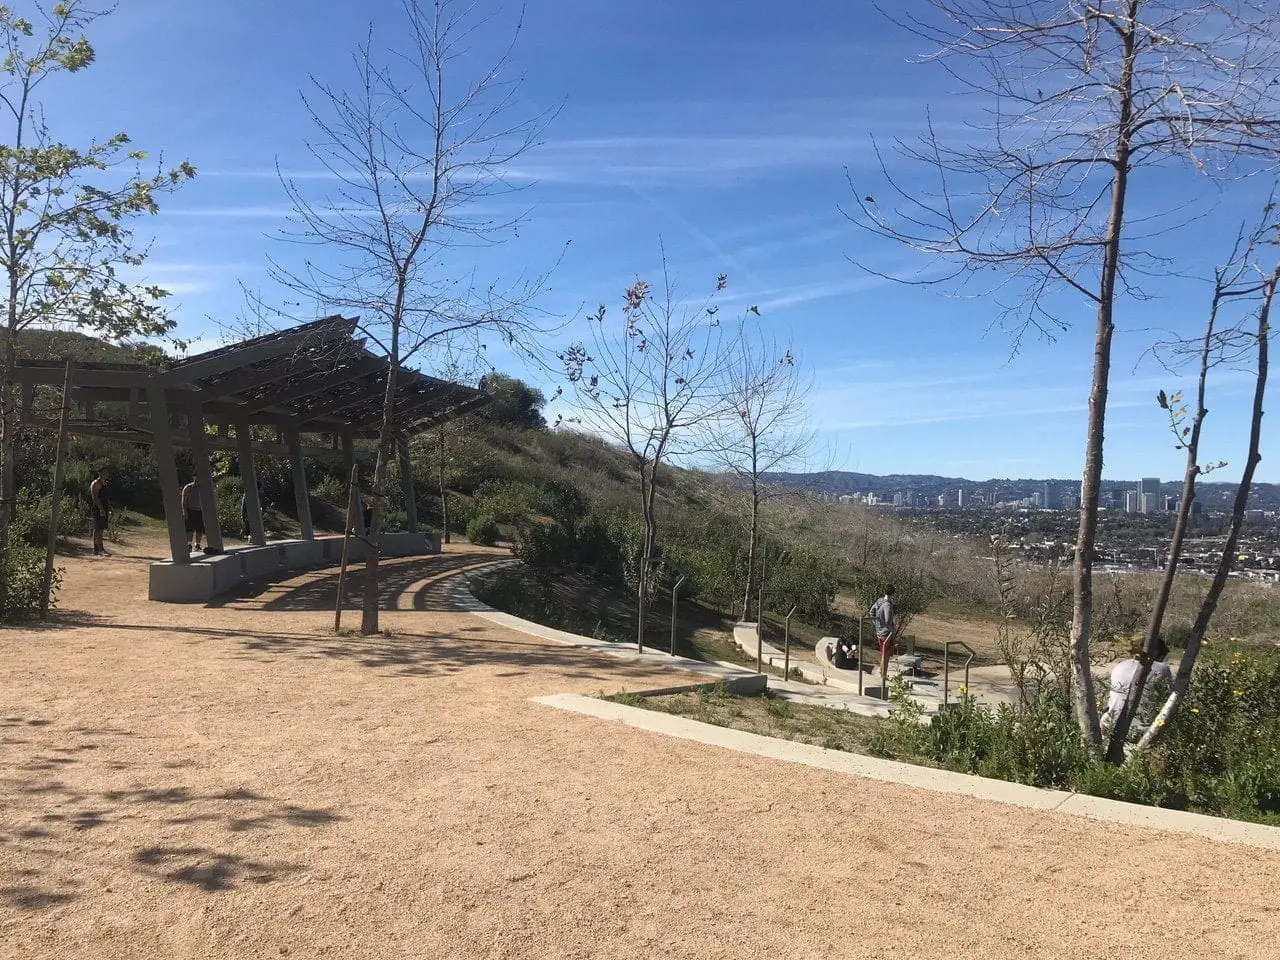 Culver city stairs